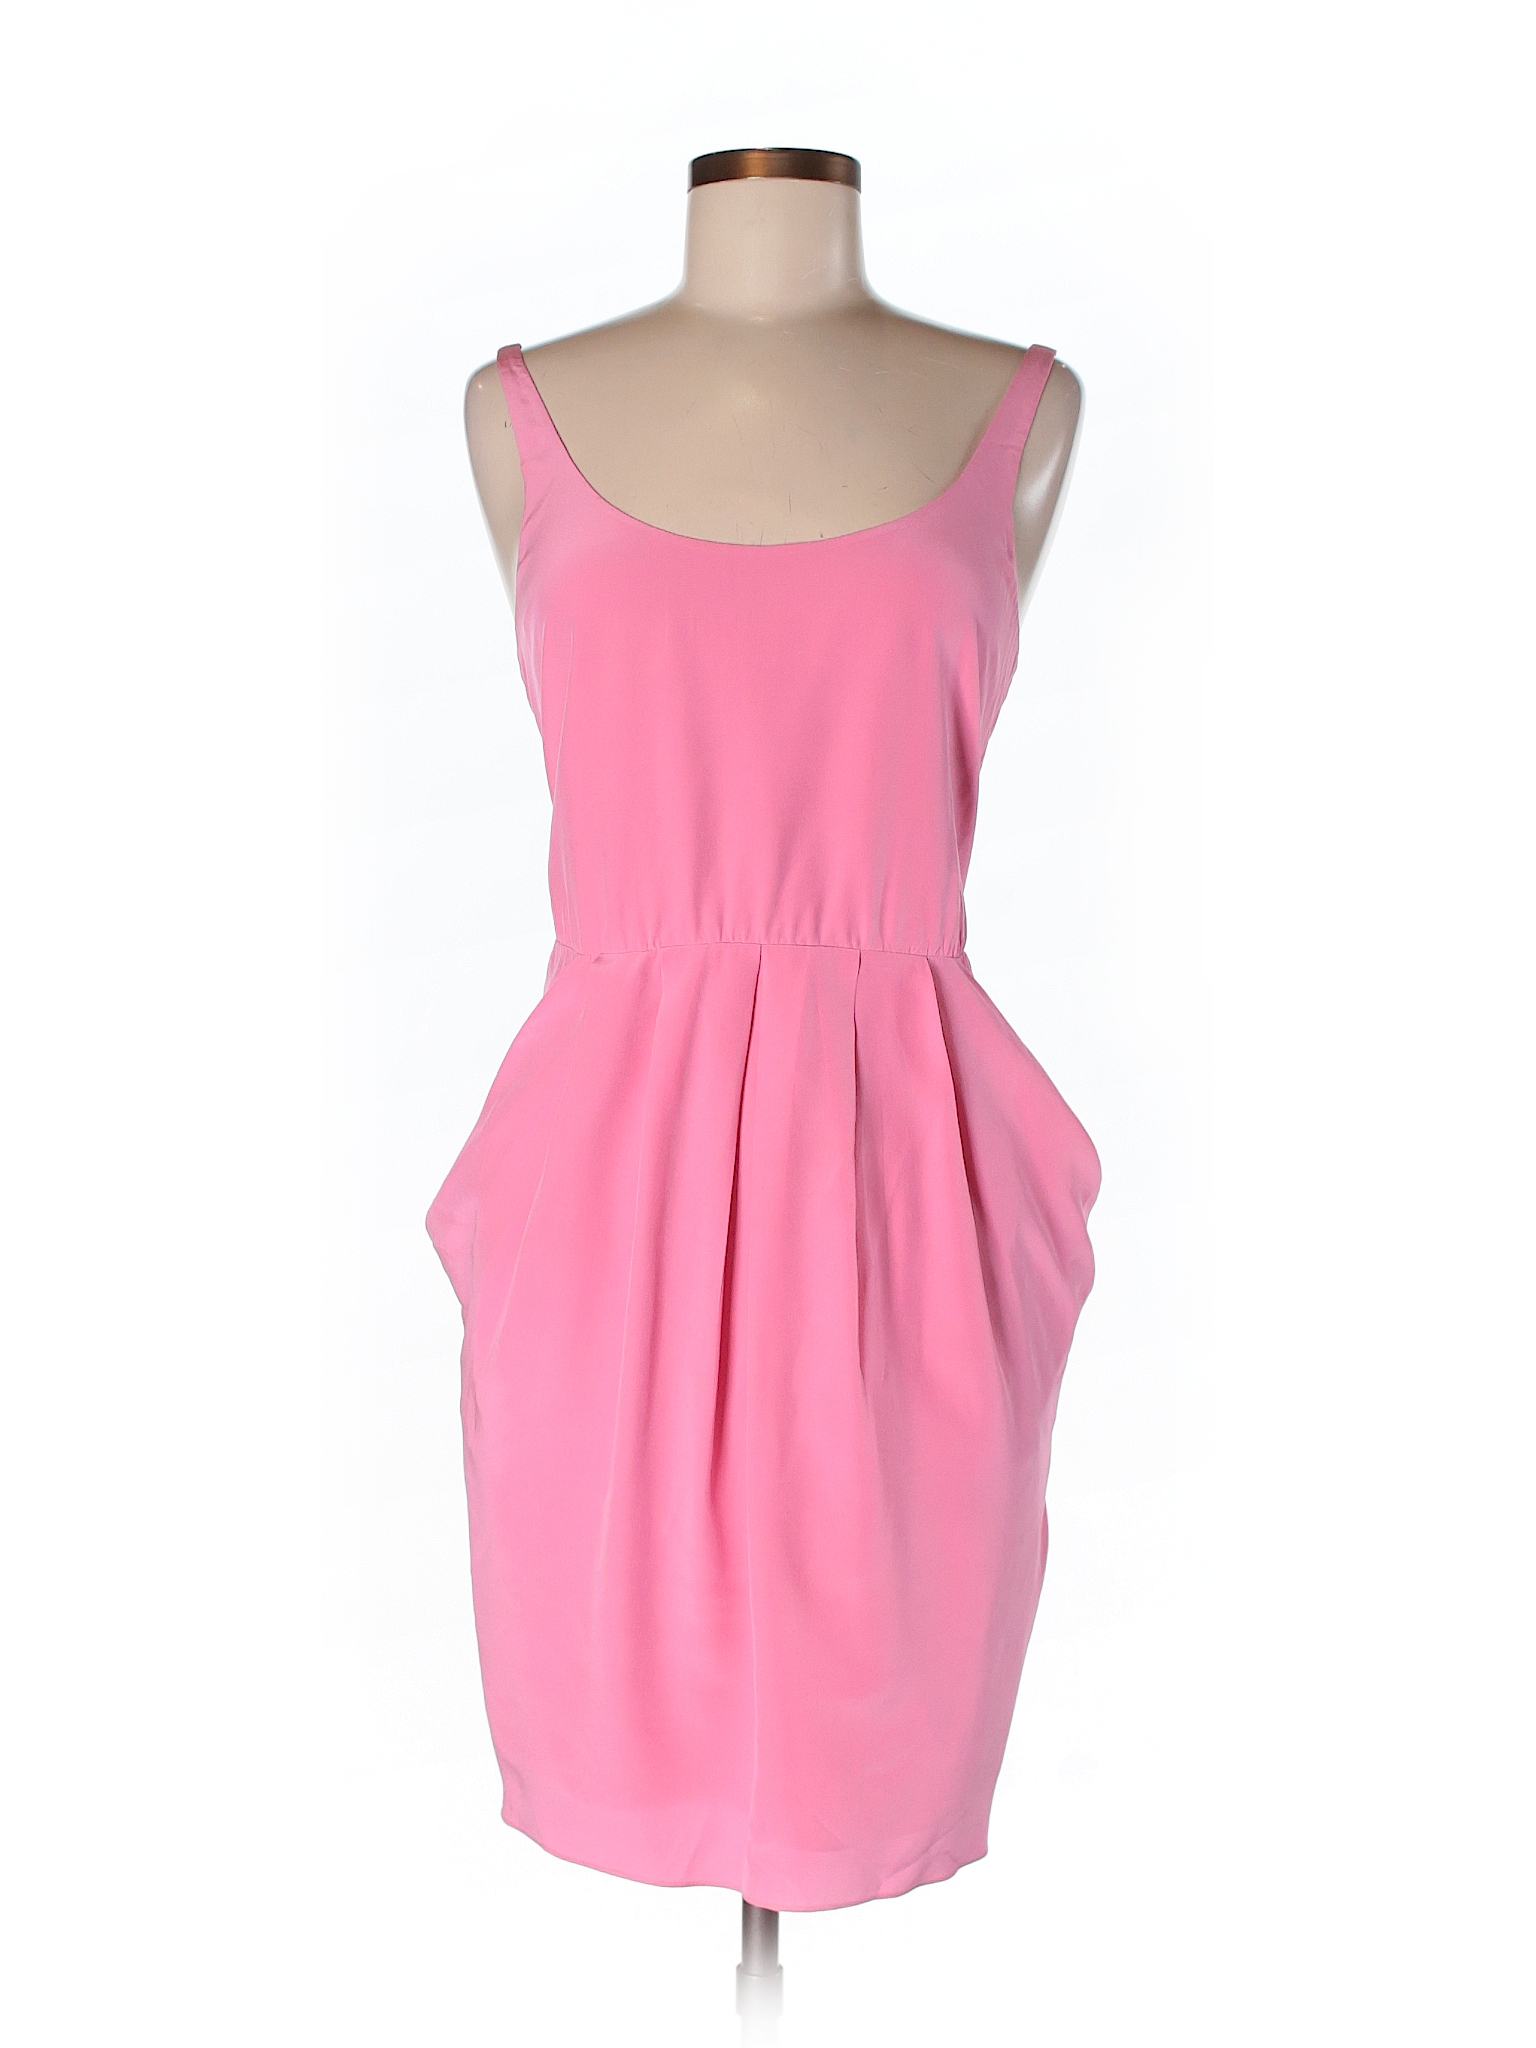 Rebecca Taylor 100% Silk Solid Light Pink Casual Dress Size 6 - 79% off ...